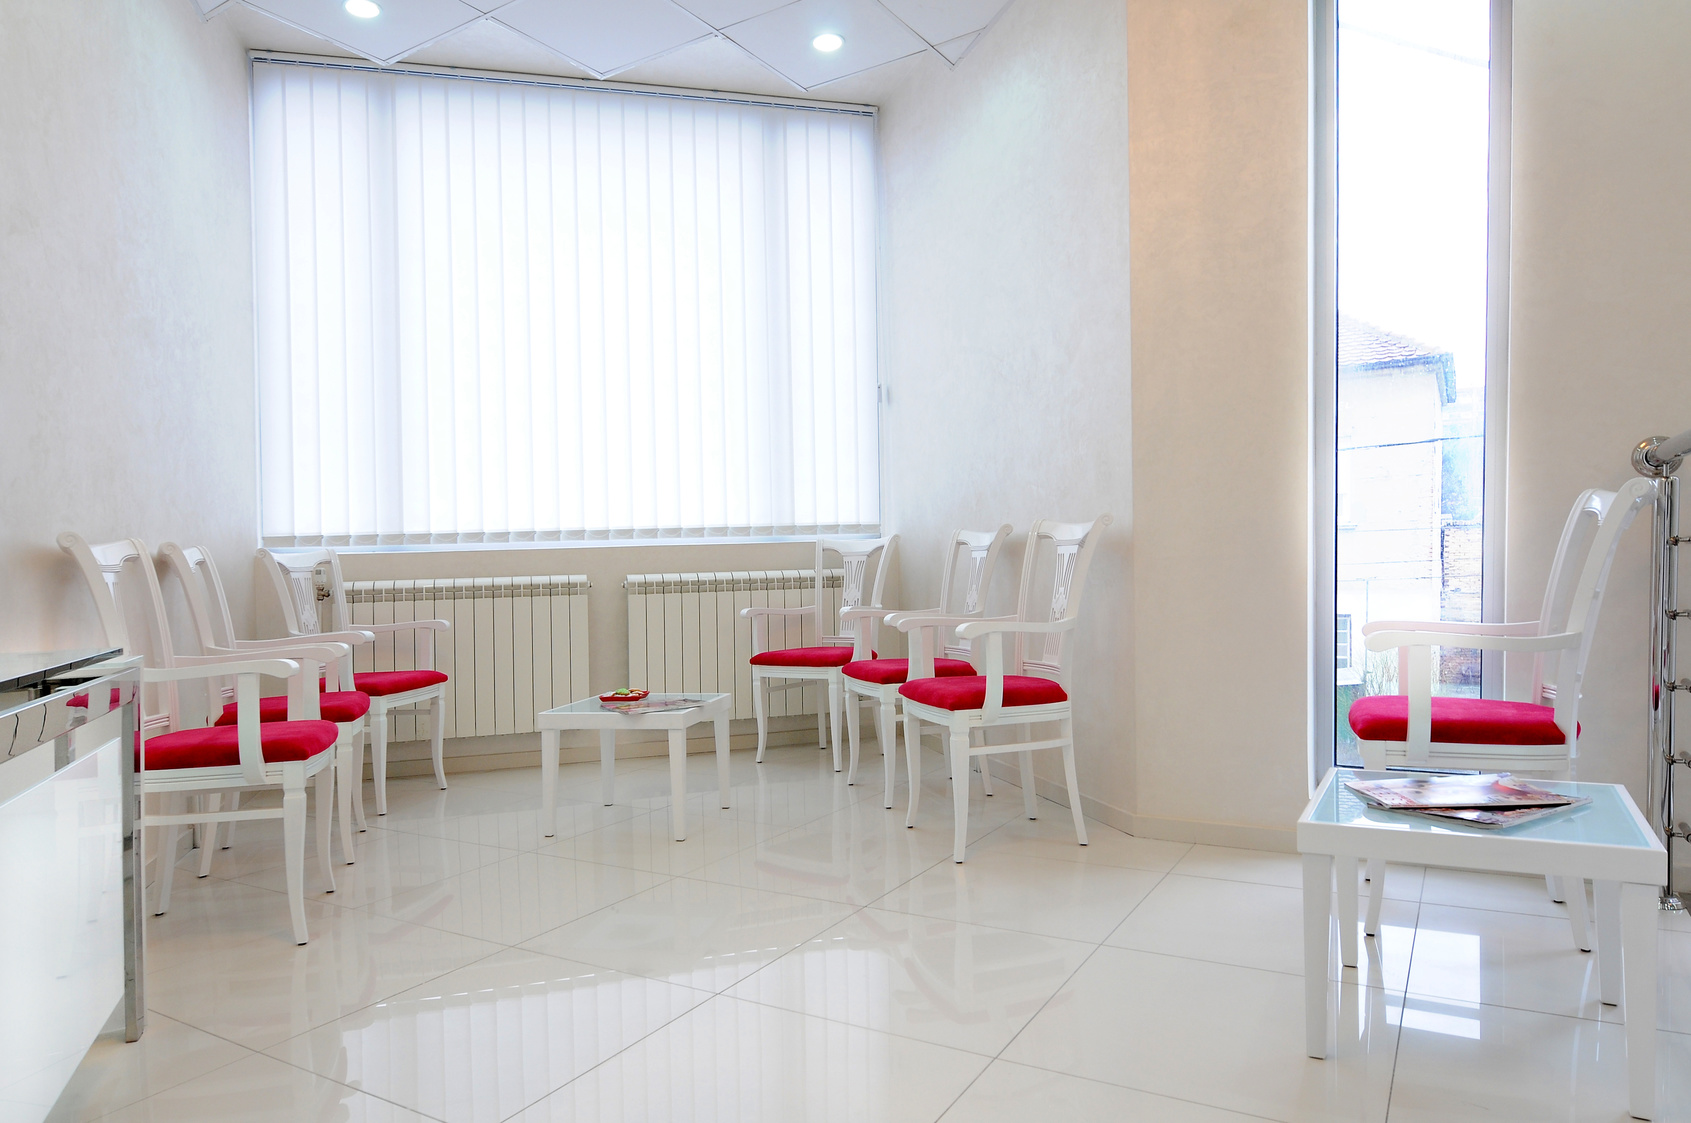 Clinical interior or reception - waiting room